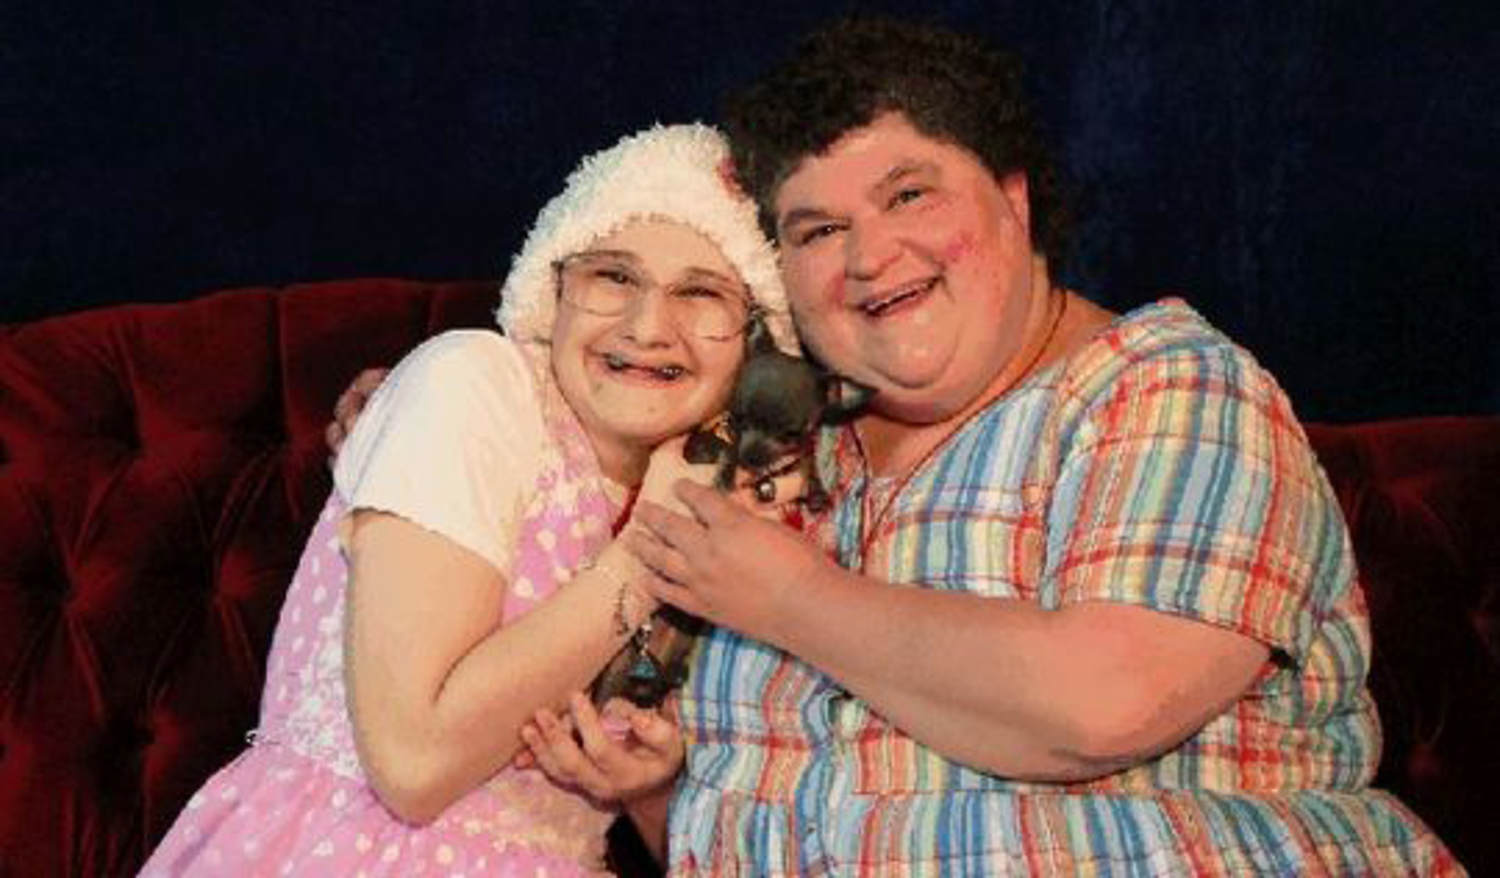 Gypsy Rose Blanchard reflects on her mom in Mother’s Day video almost 9 years after her murder